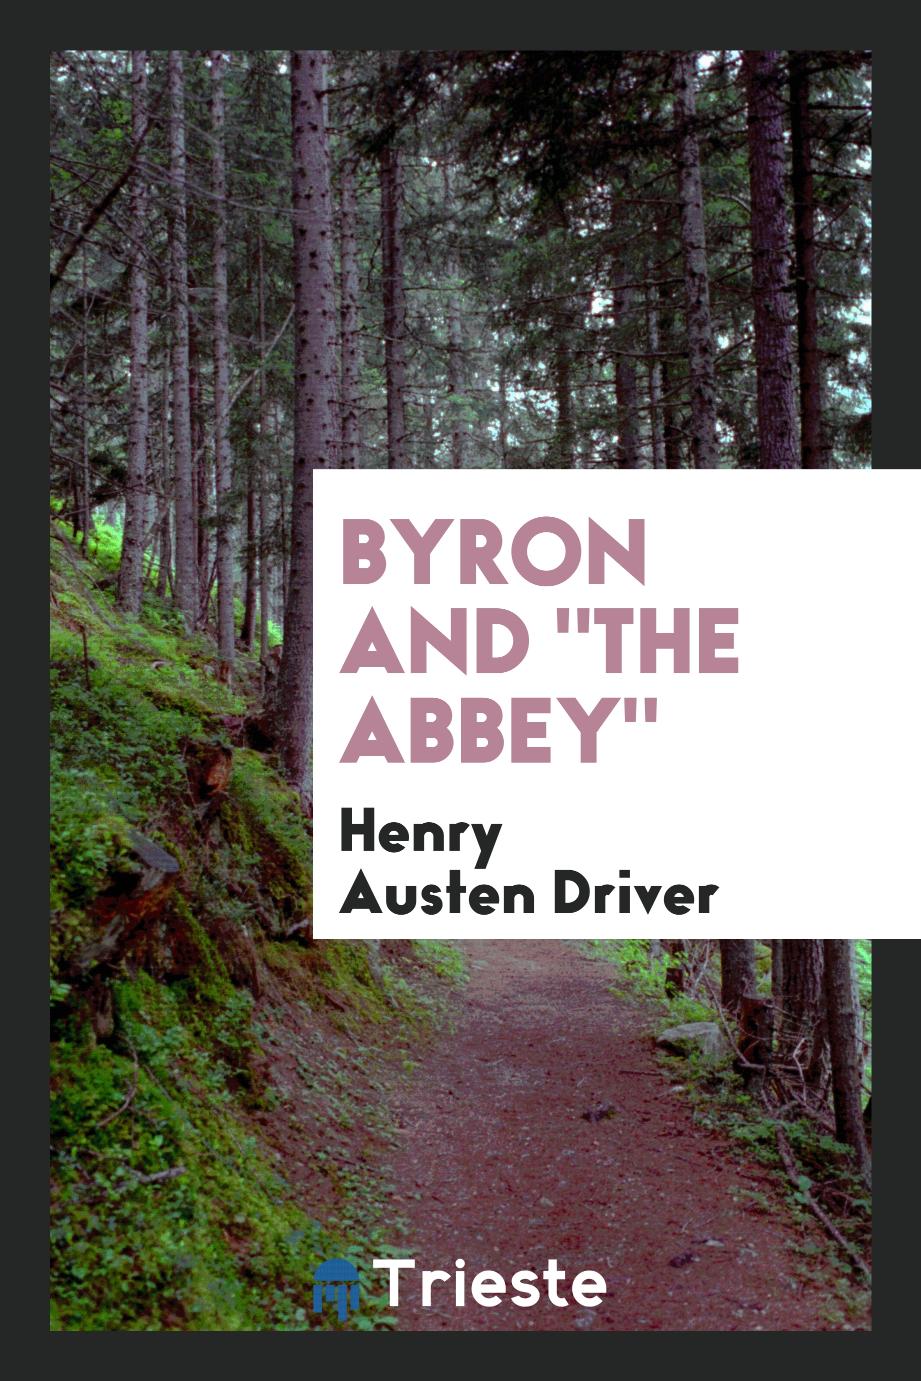 Byron and "The Abbey"